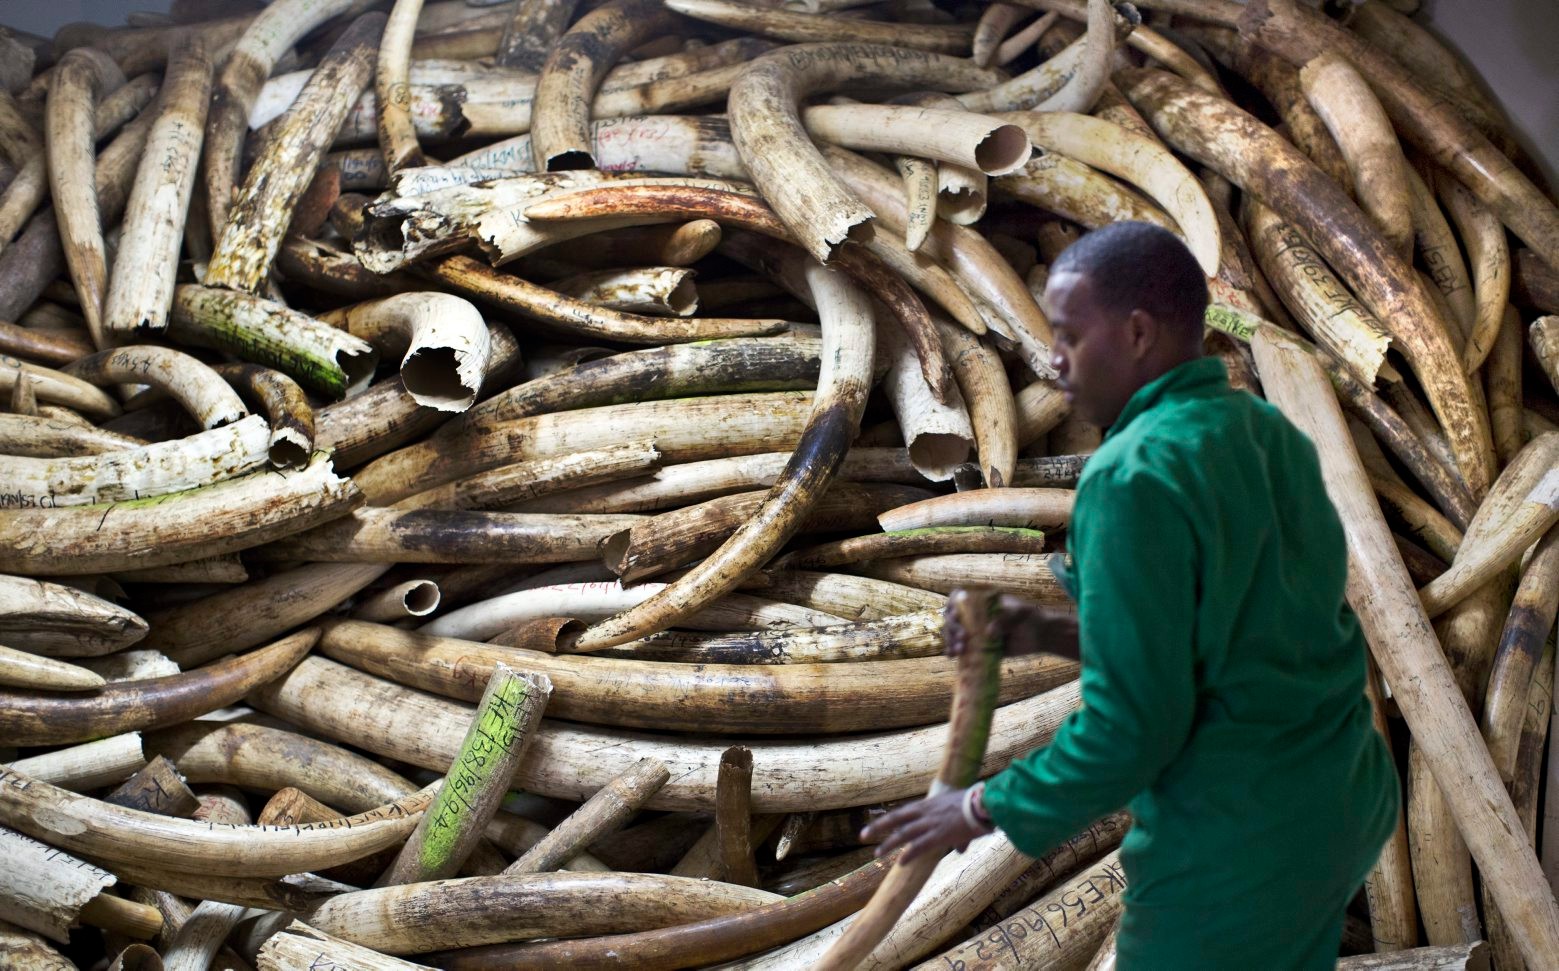 A worker removes elephant tusks from a pile in the secure strongroom, to be logged and carried outside into shipping containers for storage, at the headquarters of the Kenya Wildlife Service (KWS) in Nairobi, Kenya Monday, April 4, 2016. Around 105 tonnes of ivory are due to be burned later this month, the largest single destruction of ivory in history according to the KWS, to coincide with the Giants Club summit for the protection of elephants which will be held in Kenya April 28-30. (AP Photo/Ben Curtis) APTOPIX Kenya Ivory